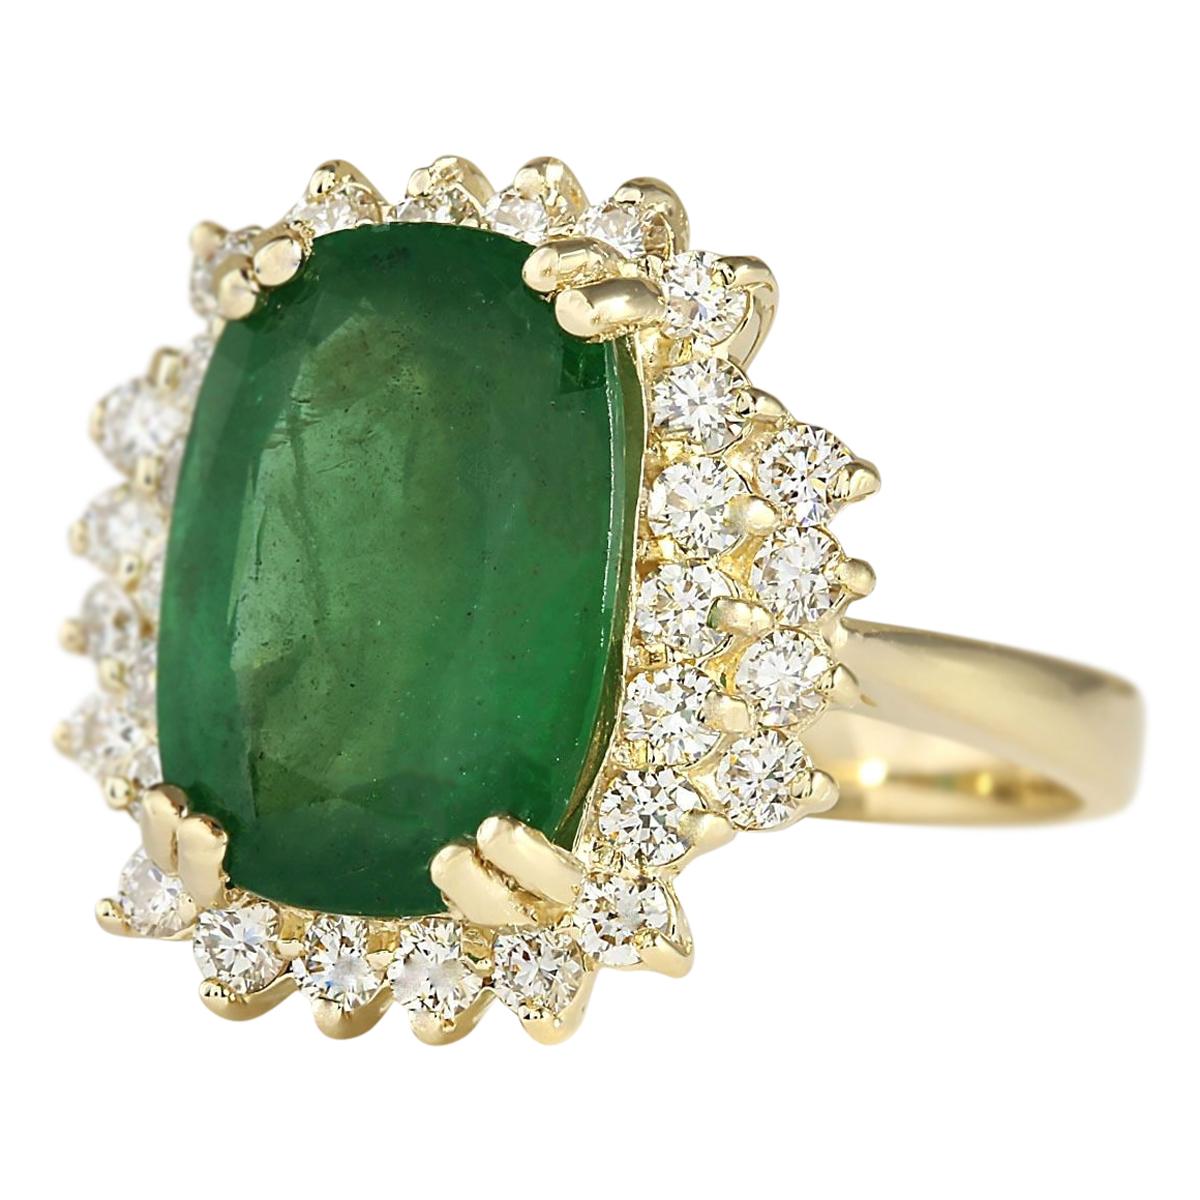 Introducing our exquisite 6.69 Carat Emerald 14 Karat Yellow Gold Diamond Ring. Crafted from stamped 14K Yellow Gold, this ring boasts a total weight of 6.6 grams, ensuring both quality and durability. The centerpiece is a stunning emerald weighing